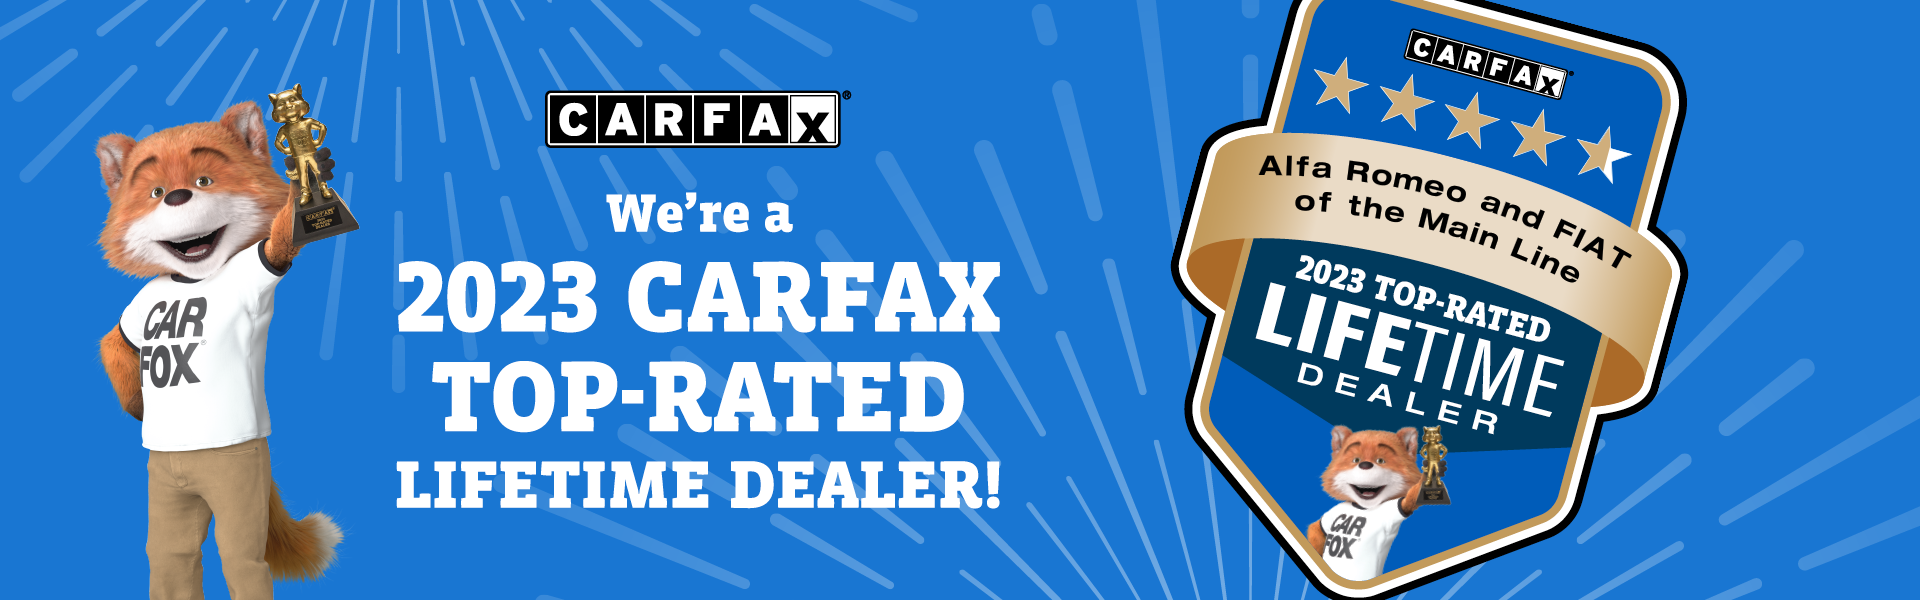 Jeff D'Ambrosio is a 2023 Top-Rated CARFAX Dealer